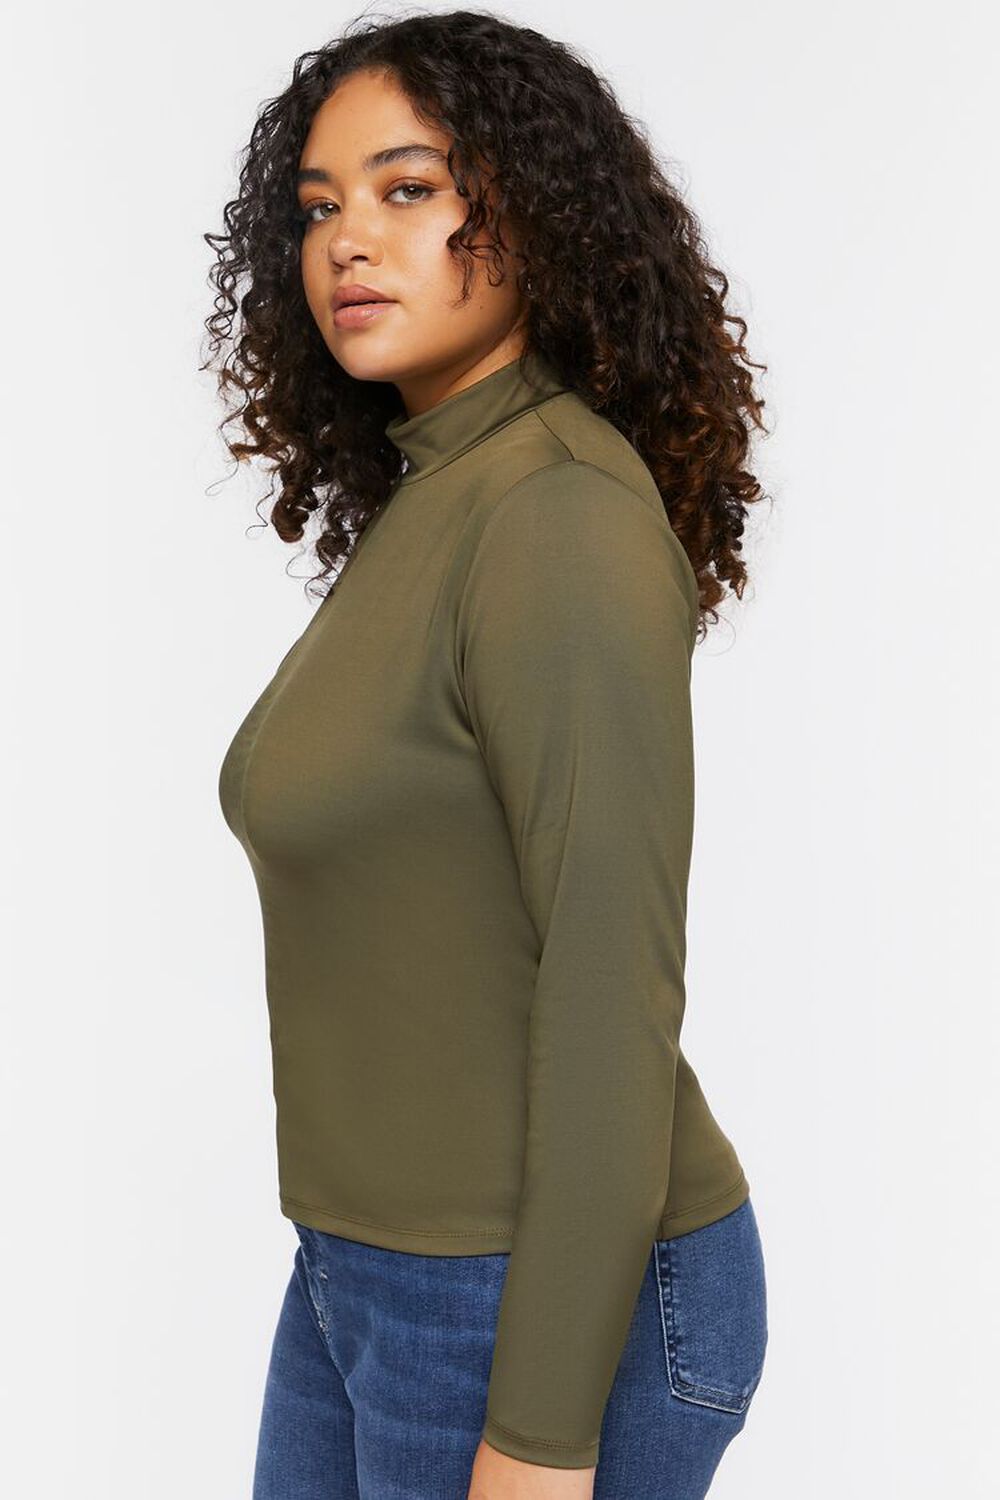 CYPRESS  Plus Size One-Sleeve Cutout Top, image 2